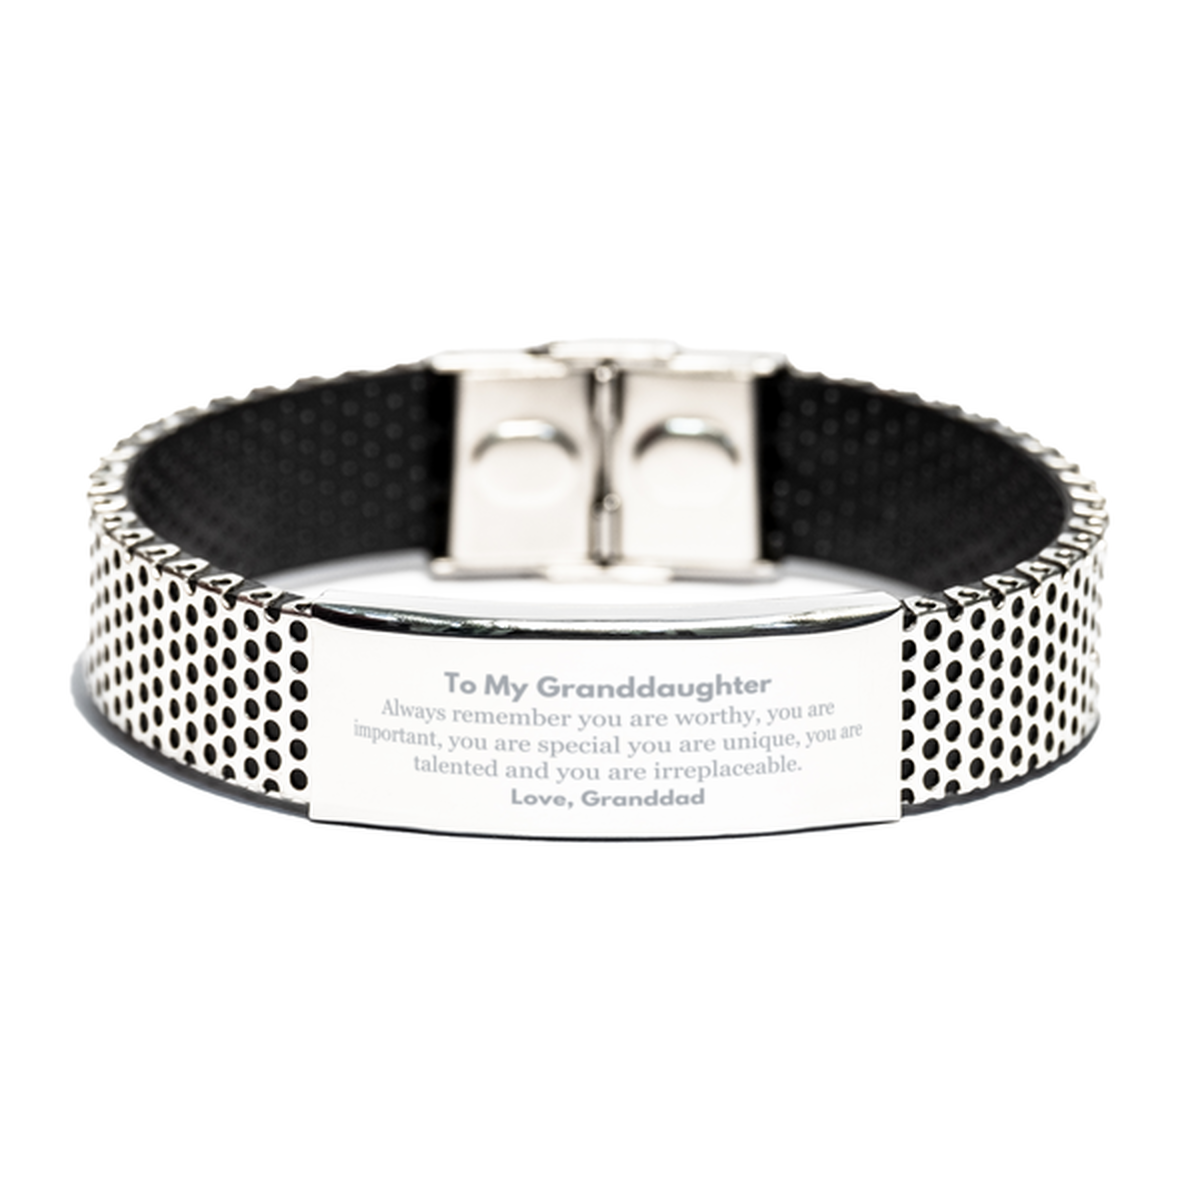 Granddaughter Birthday Gifts from Granddad, Inspirational Stainless Steel Bracelet for Granddaughter Christmas Graduation Gifts for Granddaughter Always remember you are worthy, you are important. Love, Granddad